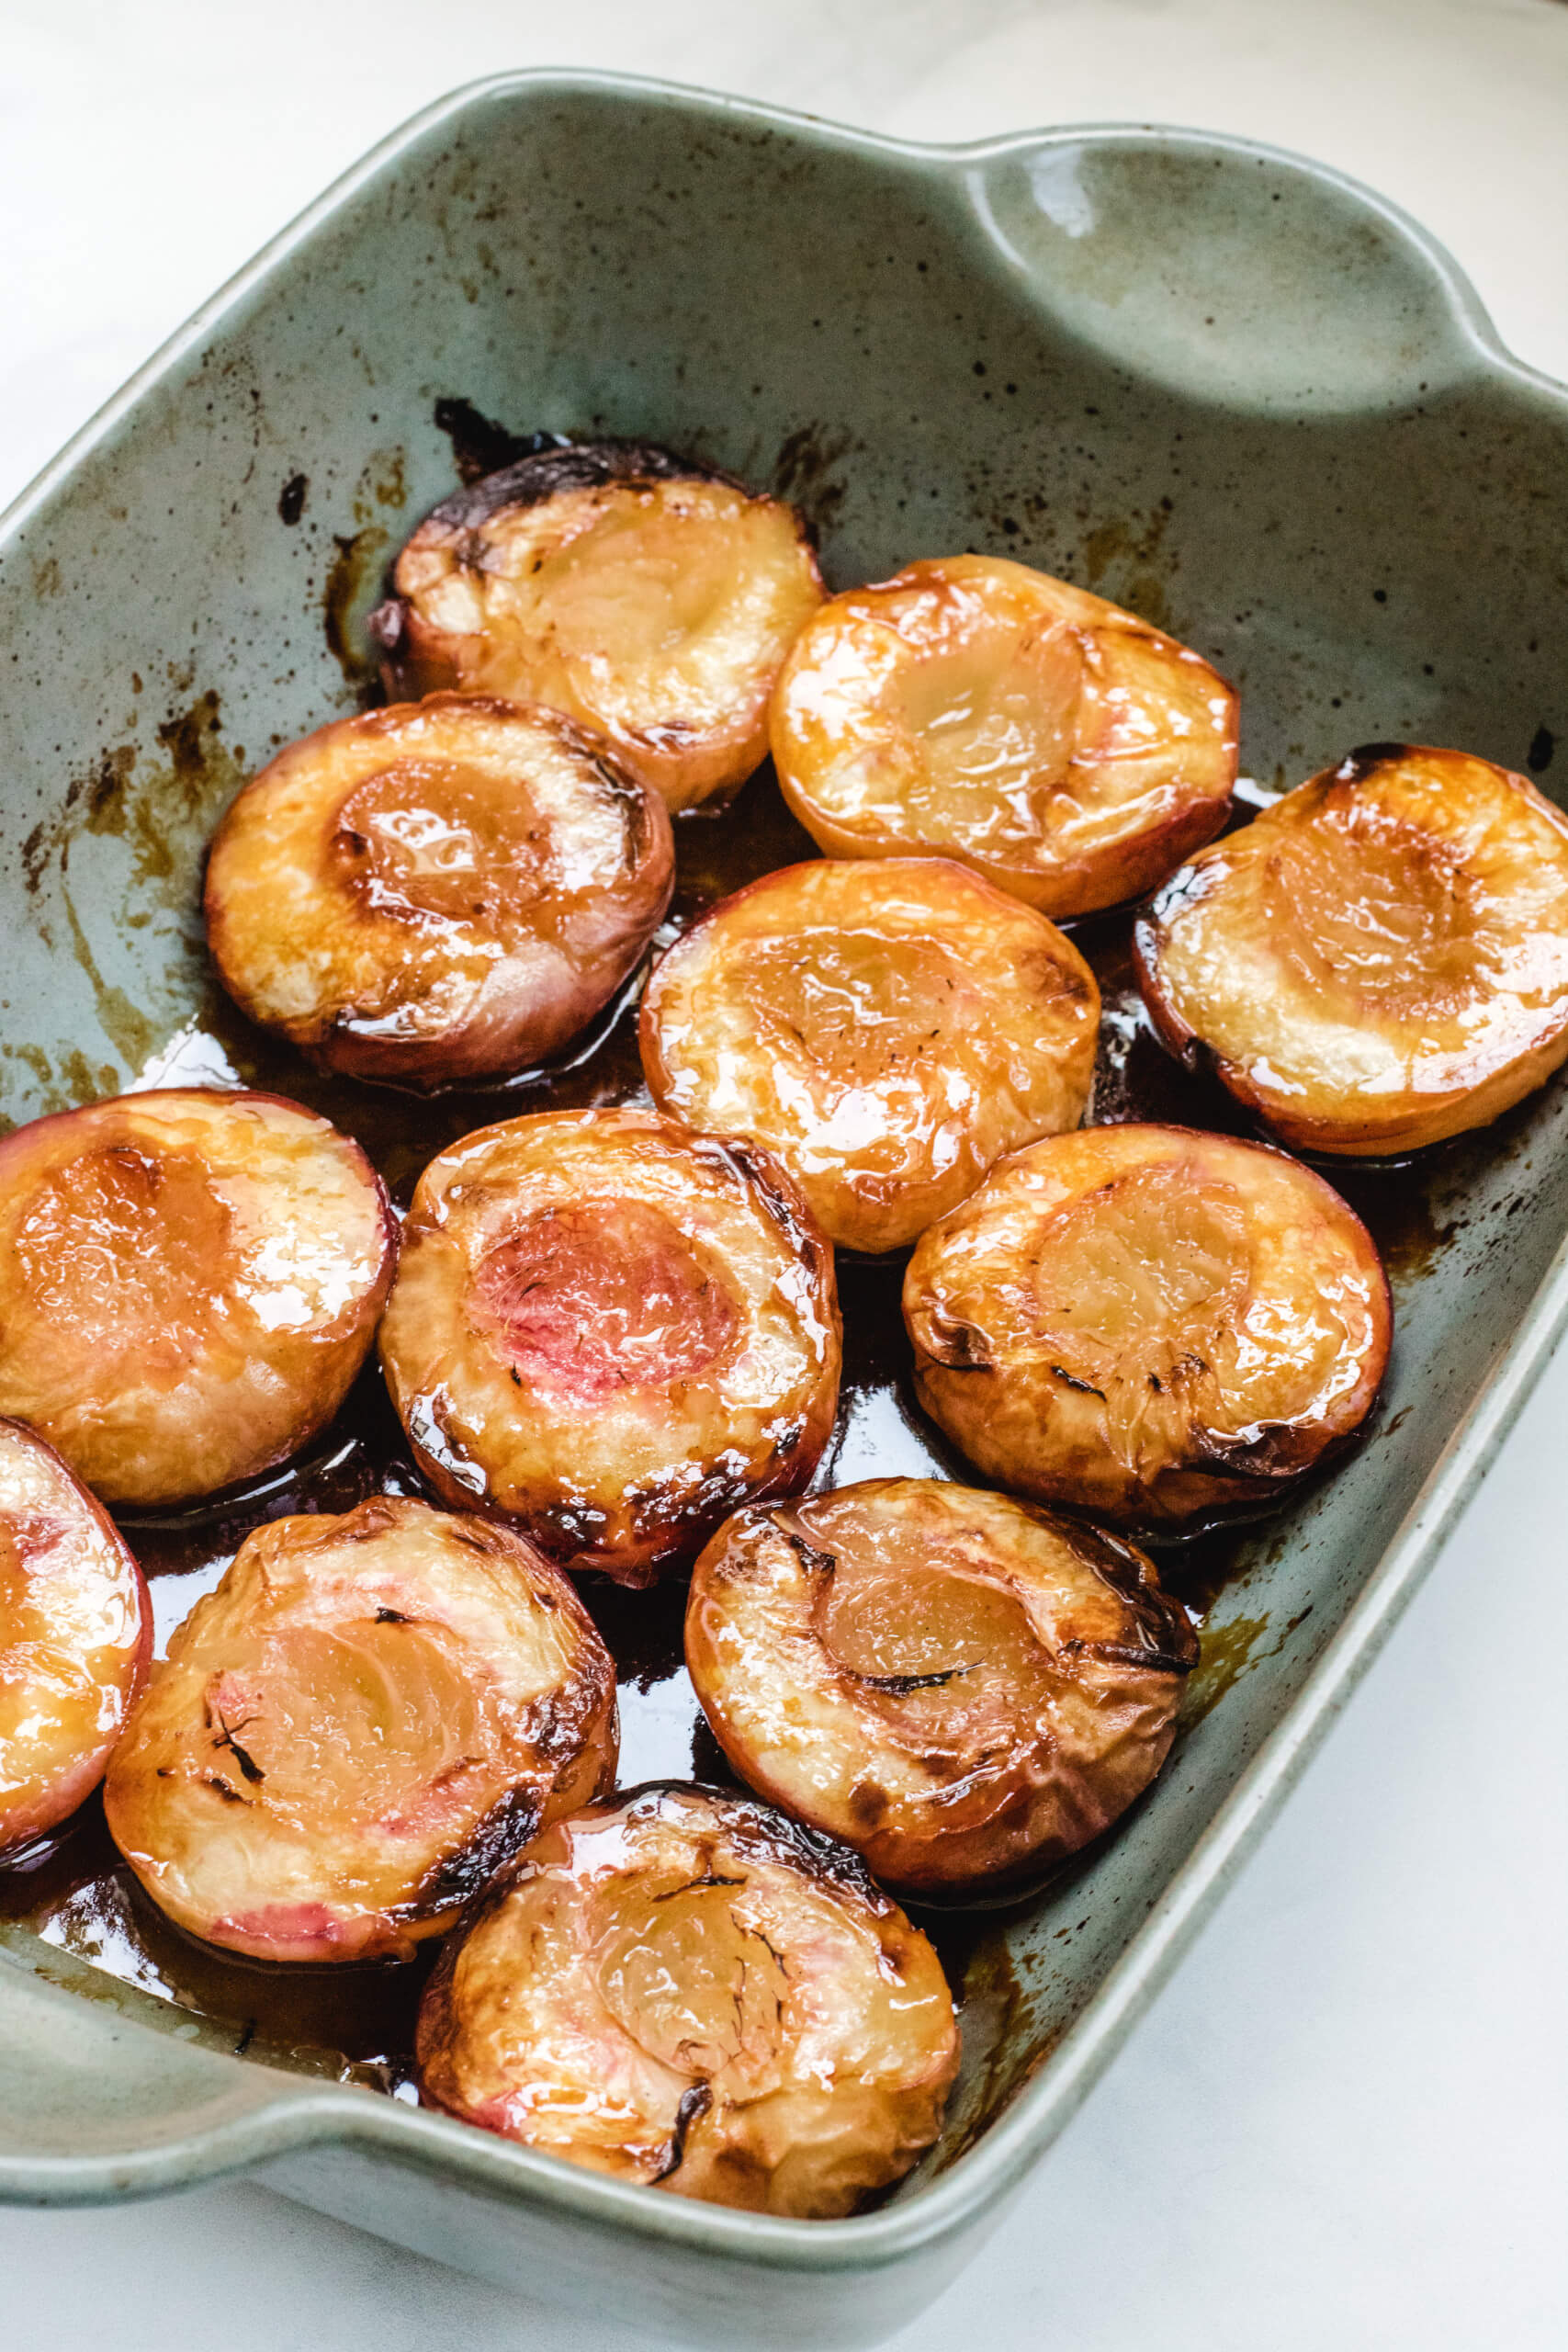 12 halves of peaches roasted in a green baking dish